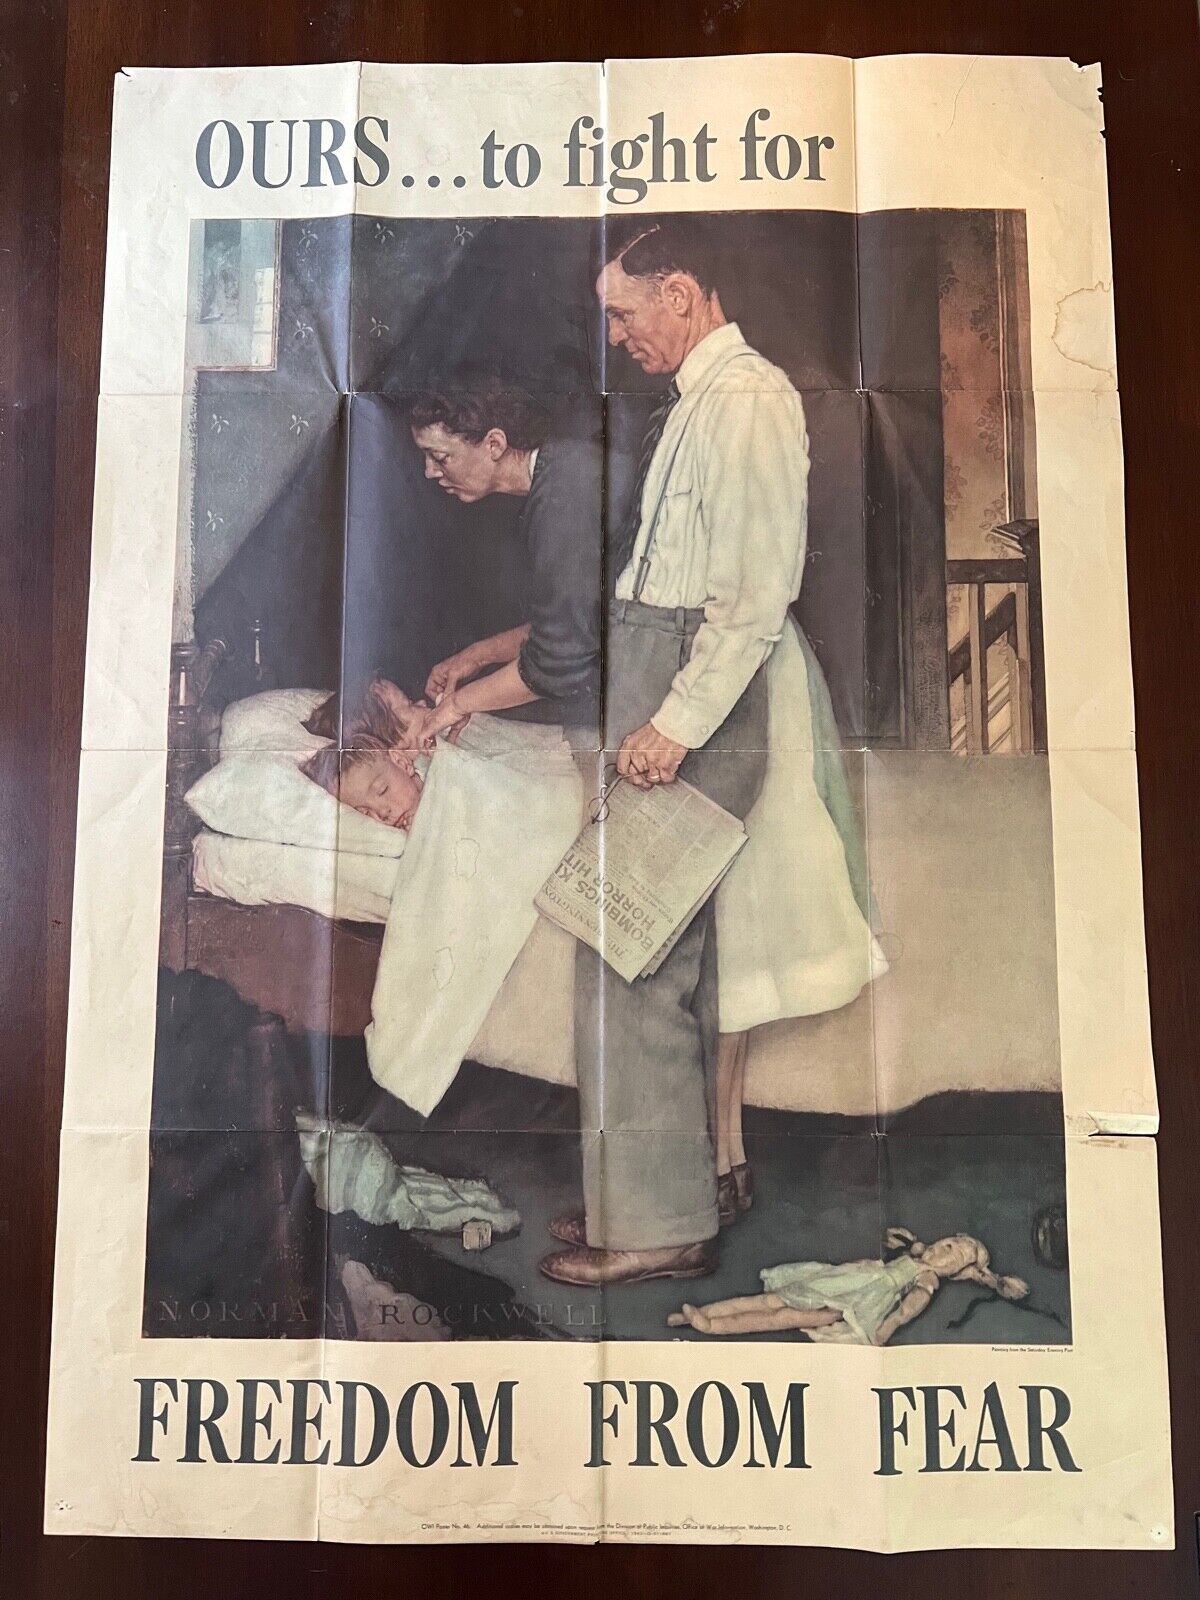 FREEDOM FROM FEAR - WW2 Poster - ORIGINAL